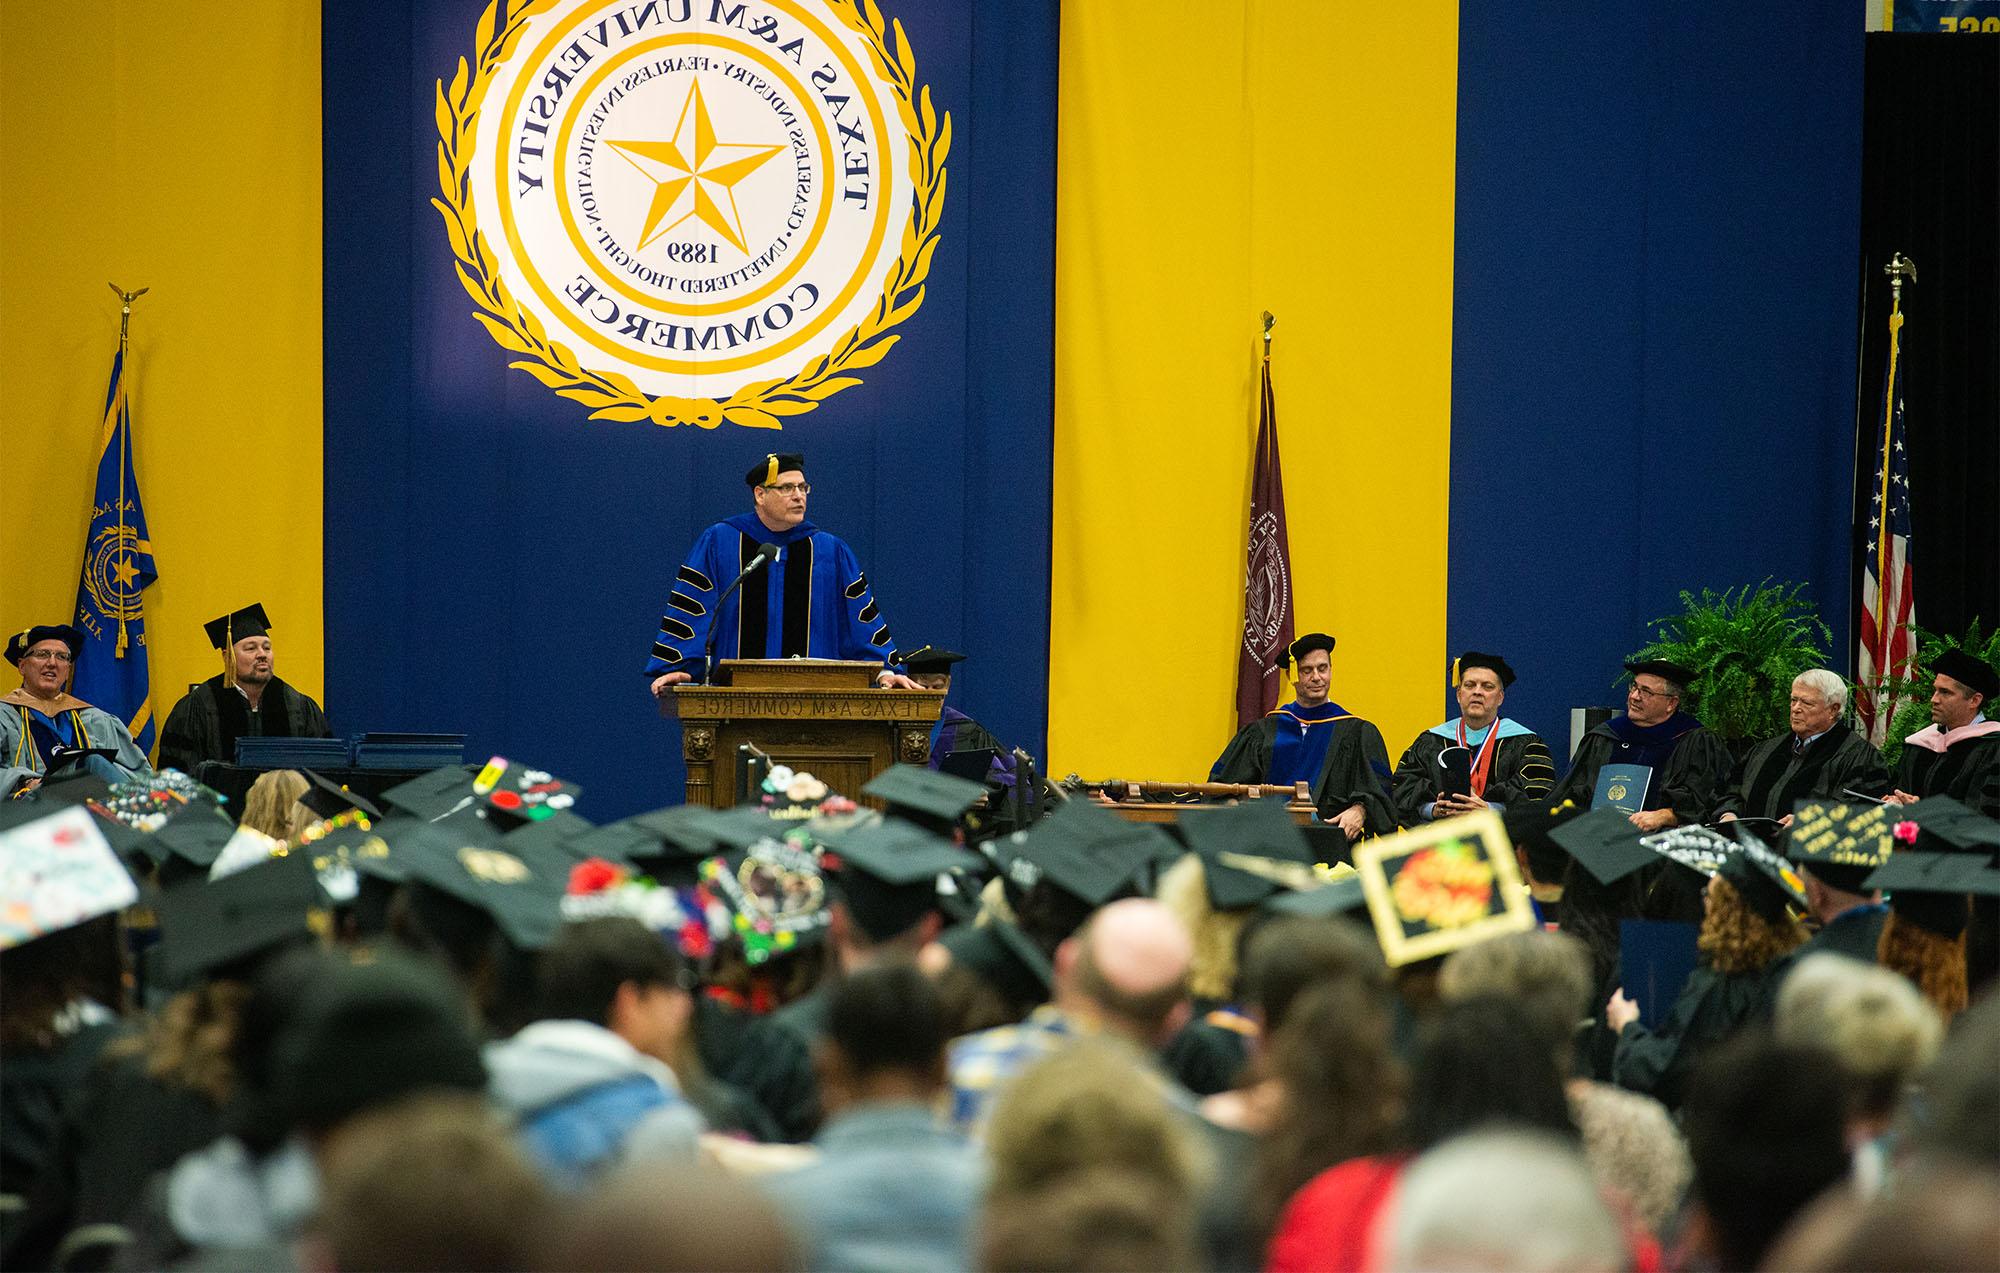 The president of the university making an announcement during graduation.